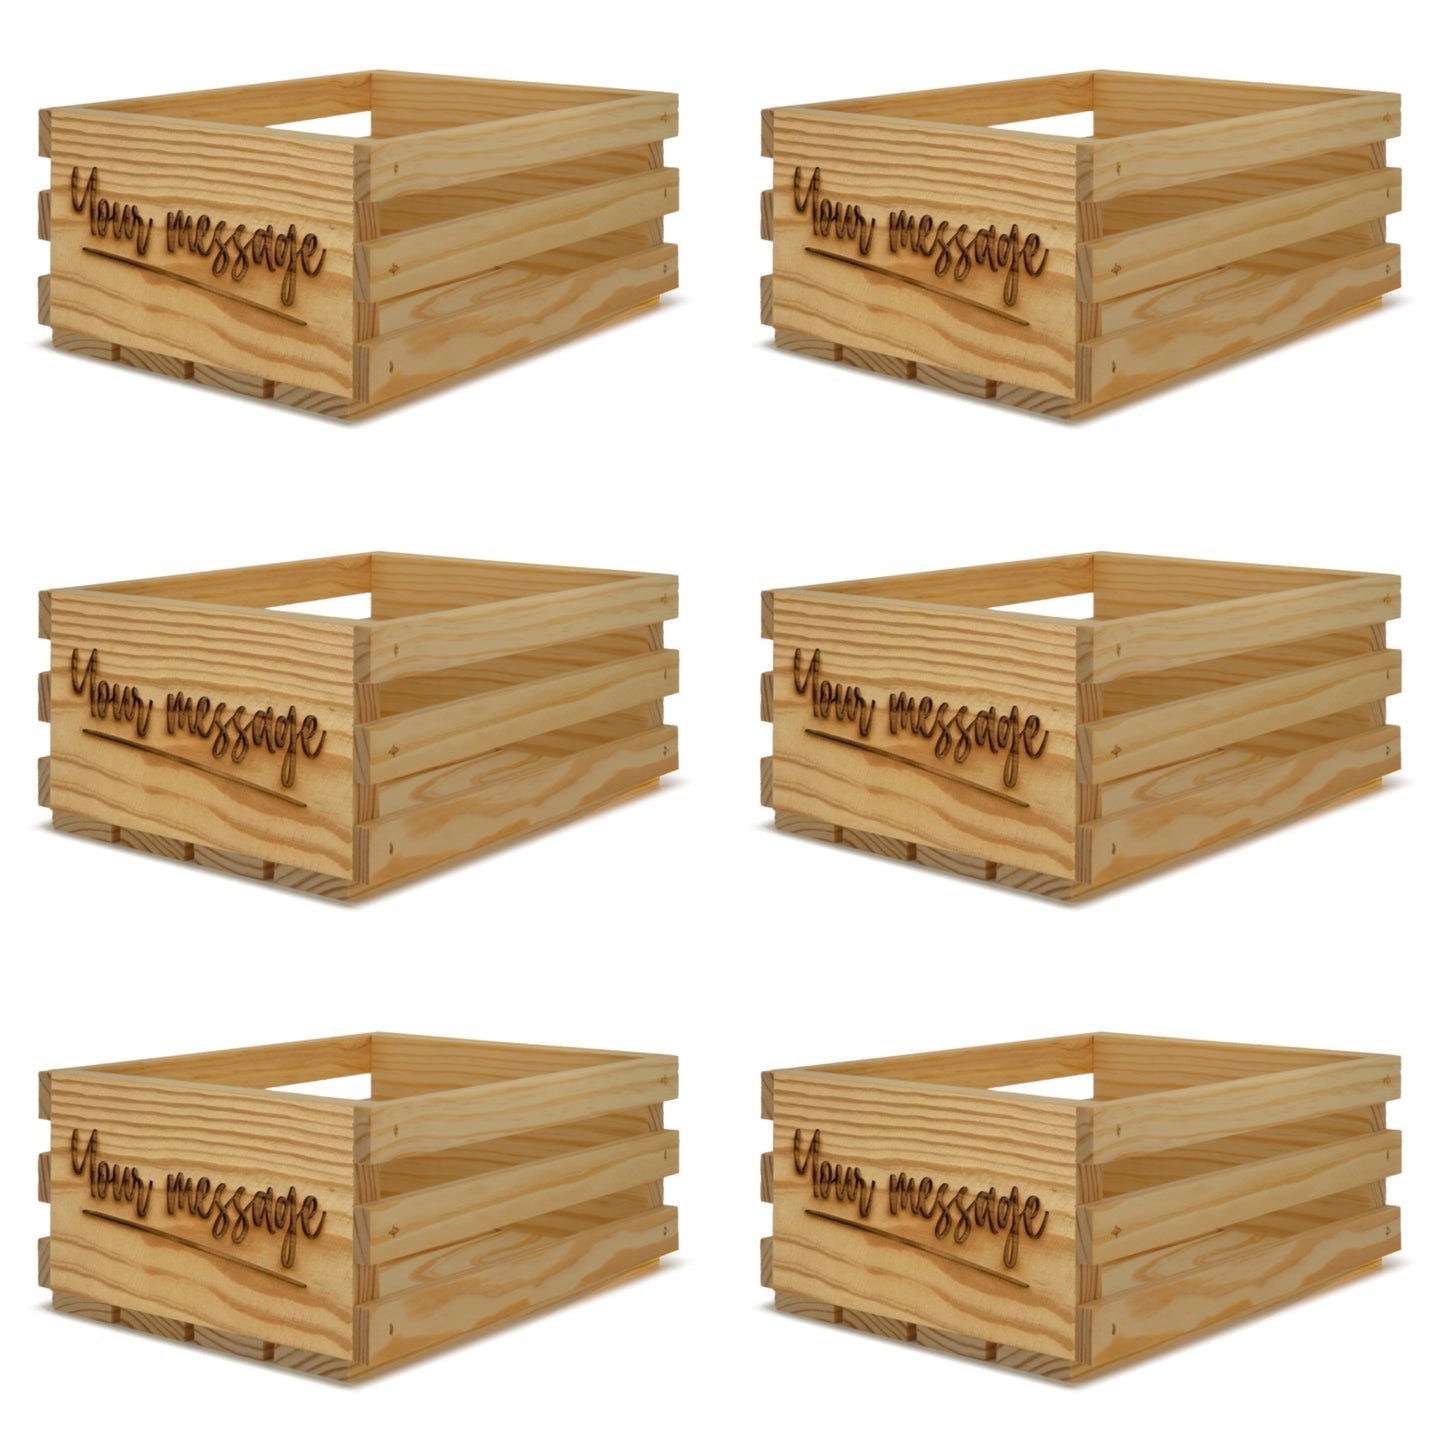 6 Small wooden crates 10x8x4.5 with your custom message